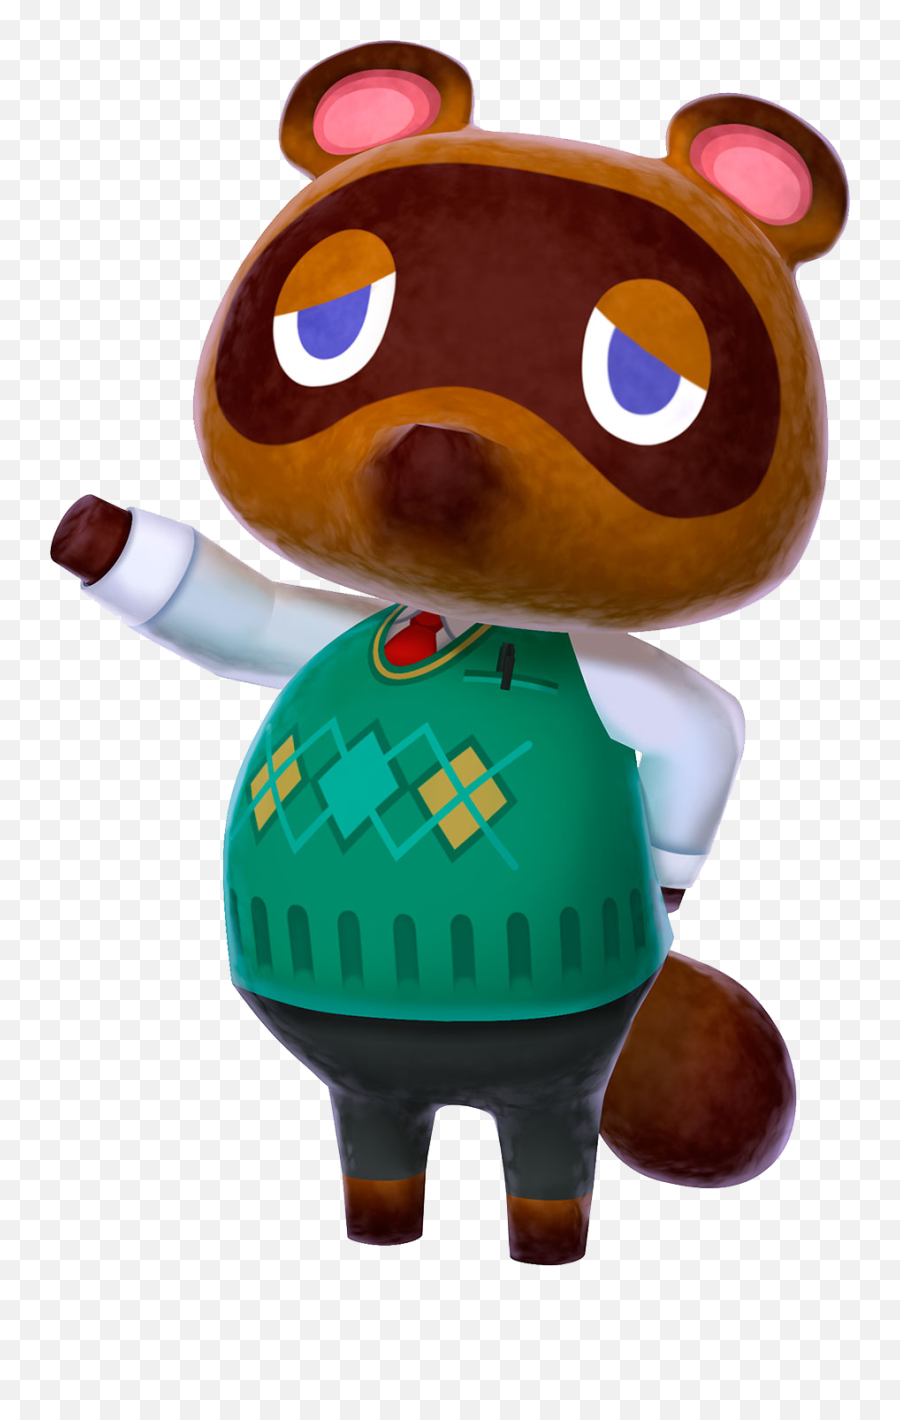 New Leaf For Nintendo - New Leaf Animal Crossing Main Characters Emoji,How Show Emotion Acnl